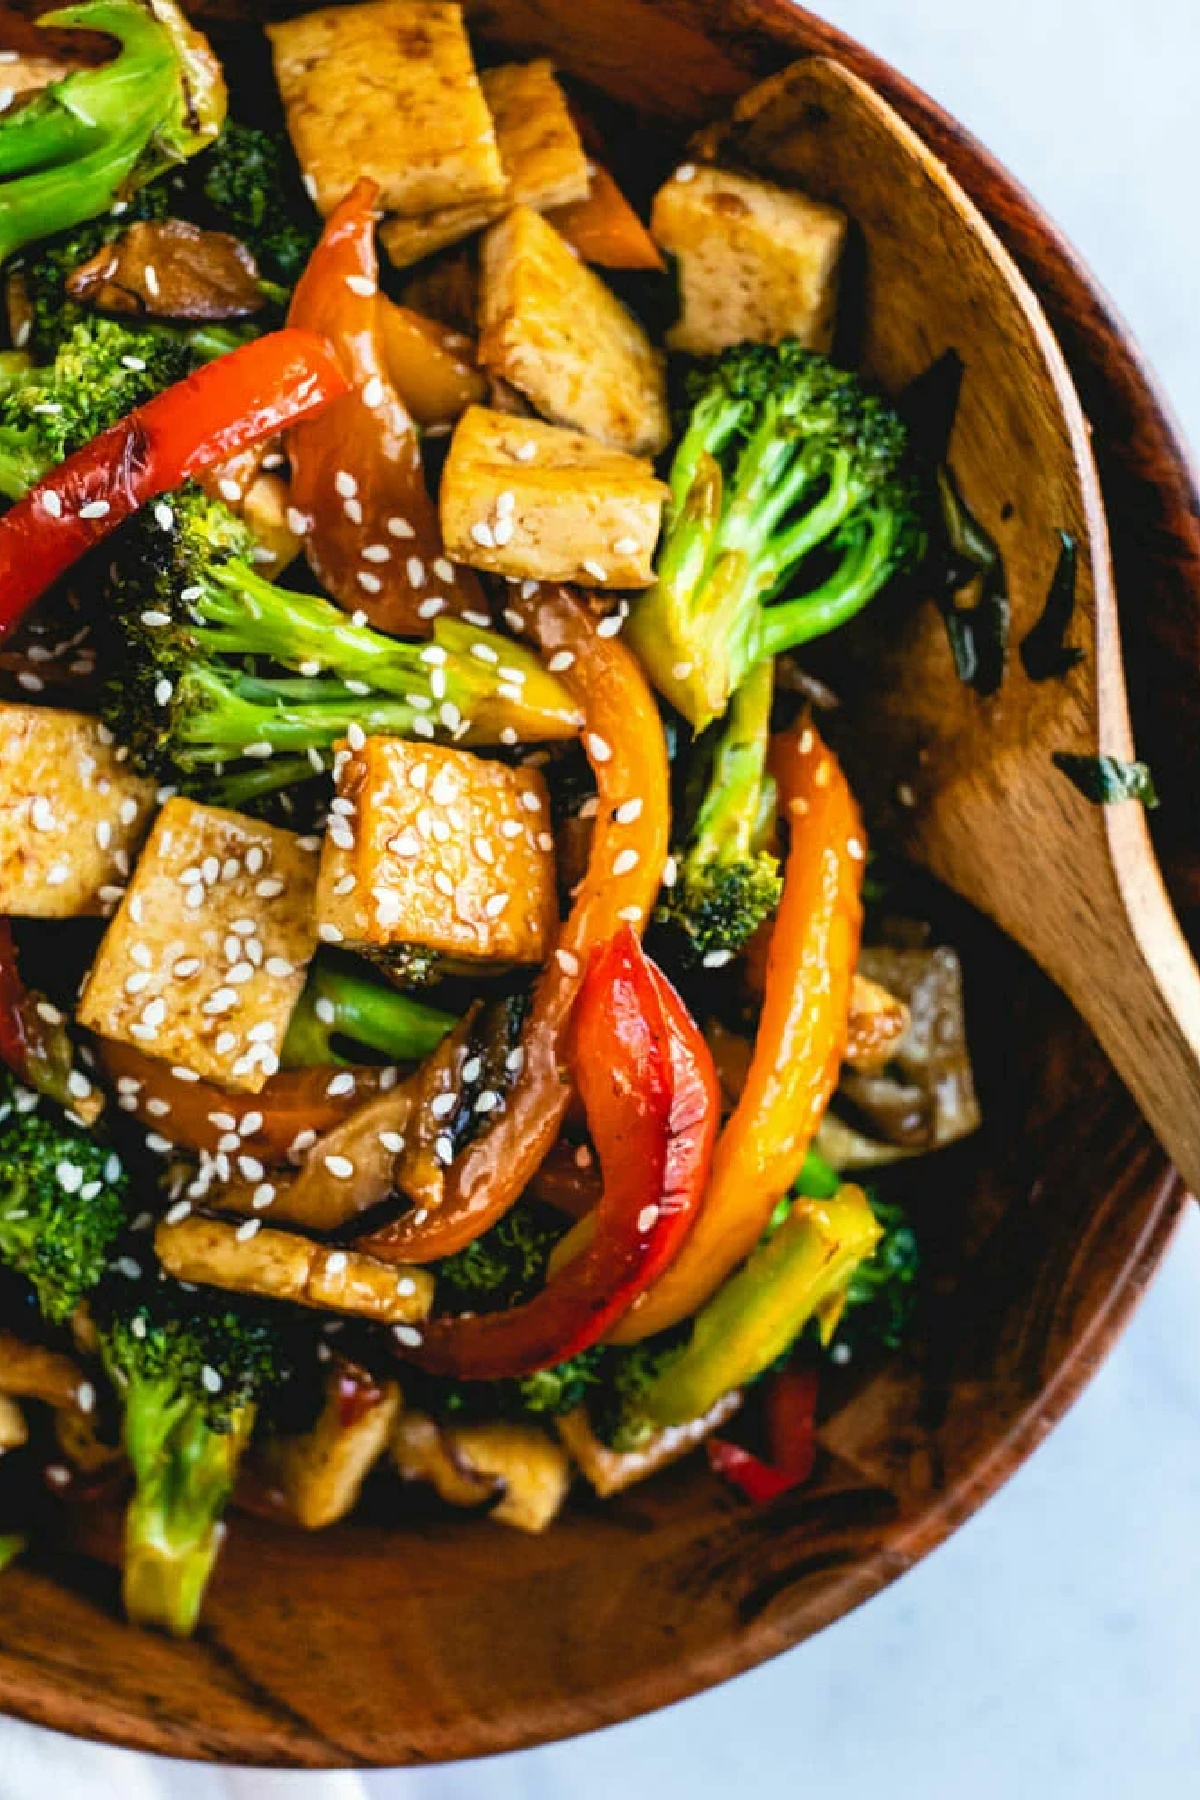 Cheap Party Food Ideas - Vegetable Stir-Fry with Tofu